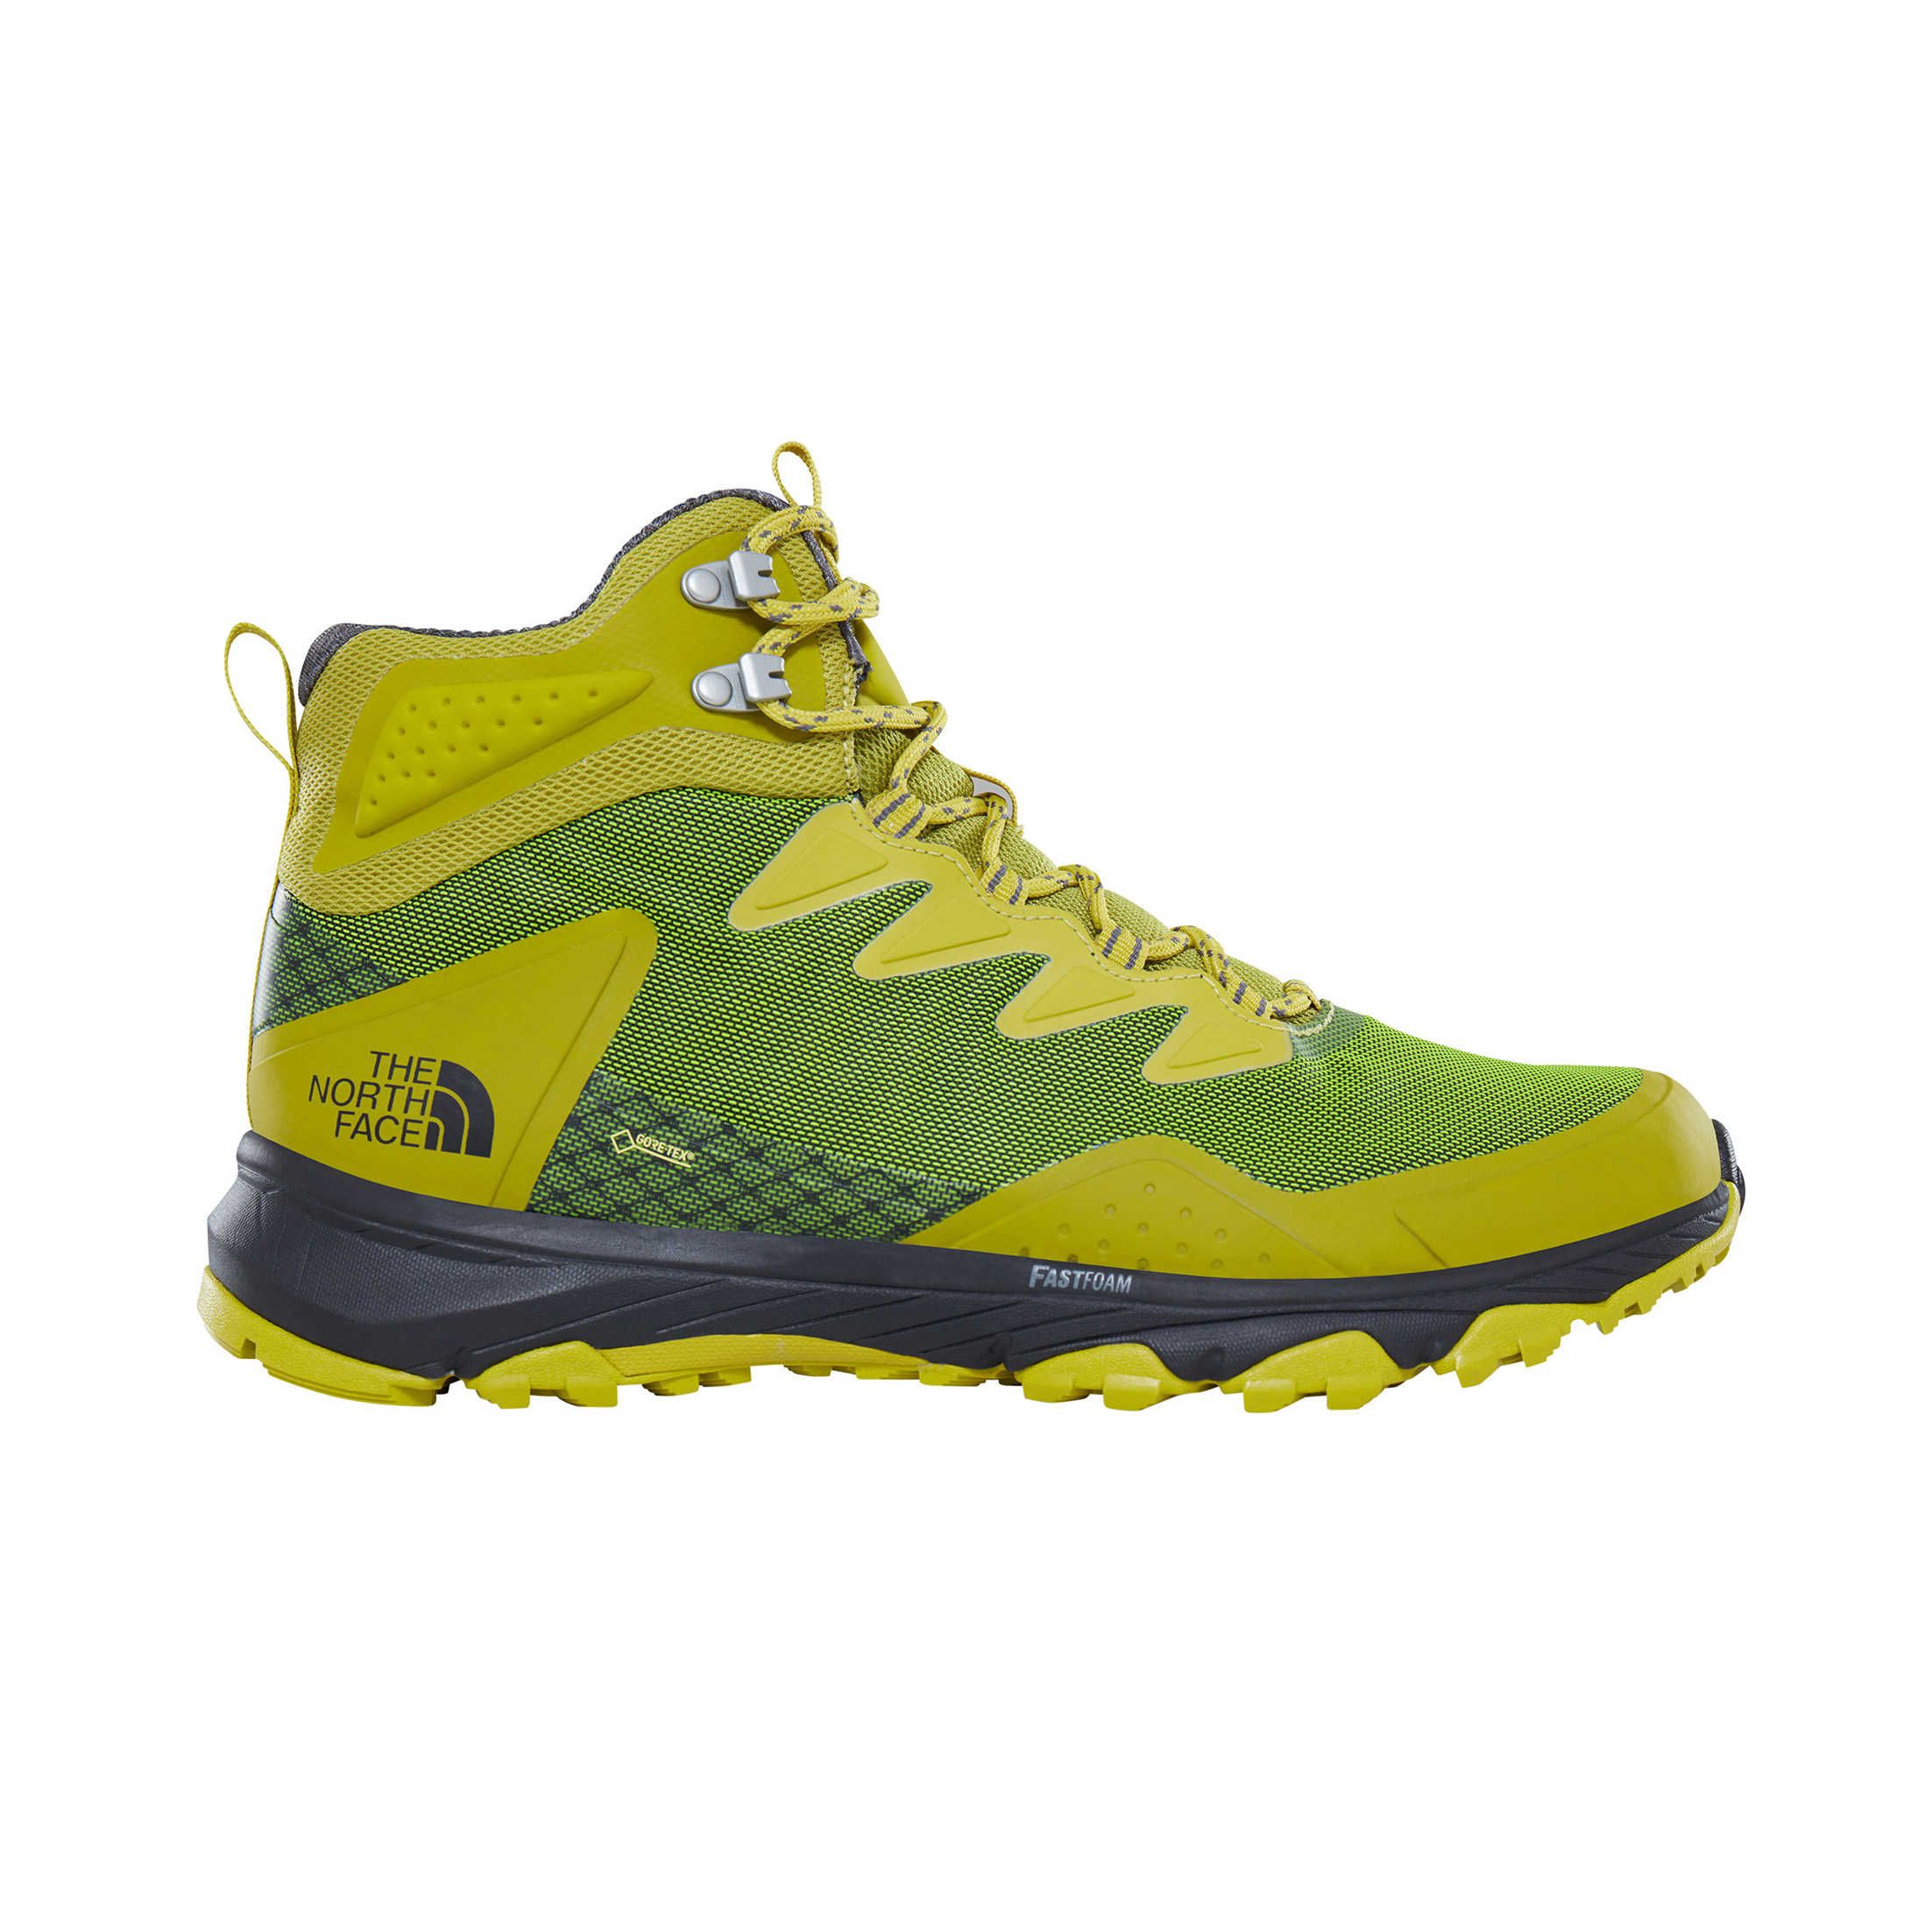 The North Face Ultra Fastpack III Mid GTX - Citronelle Green/Zinc Grey 